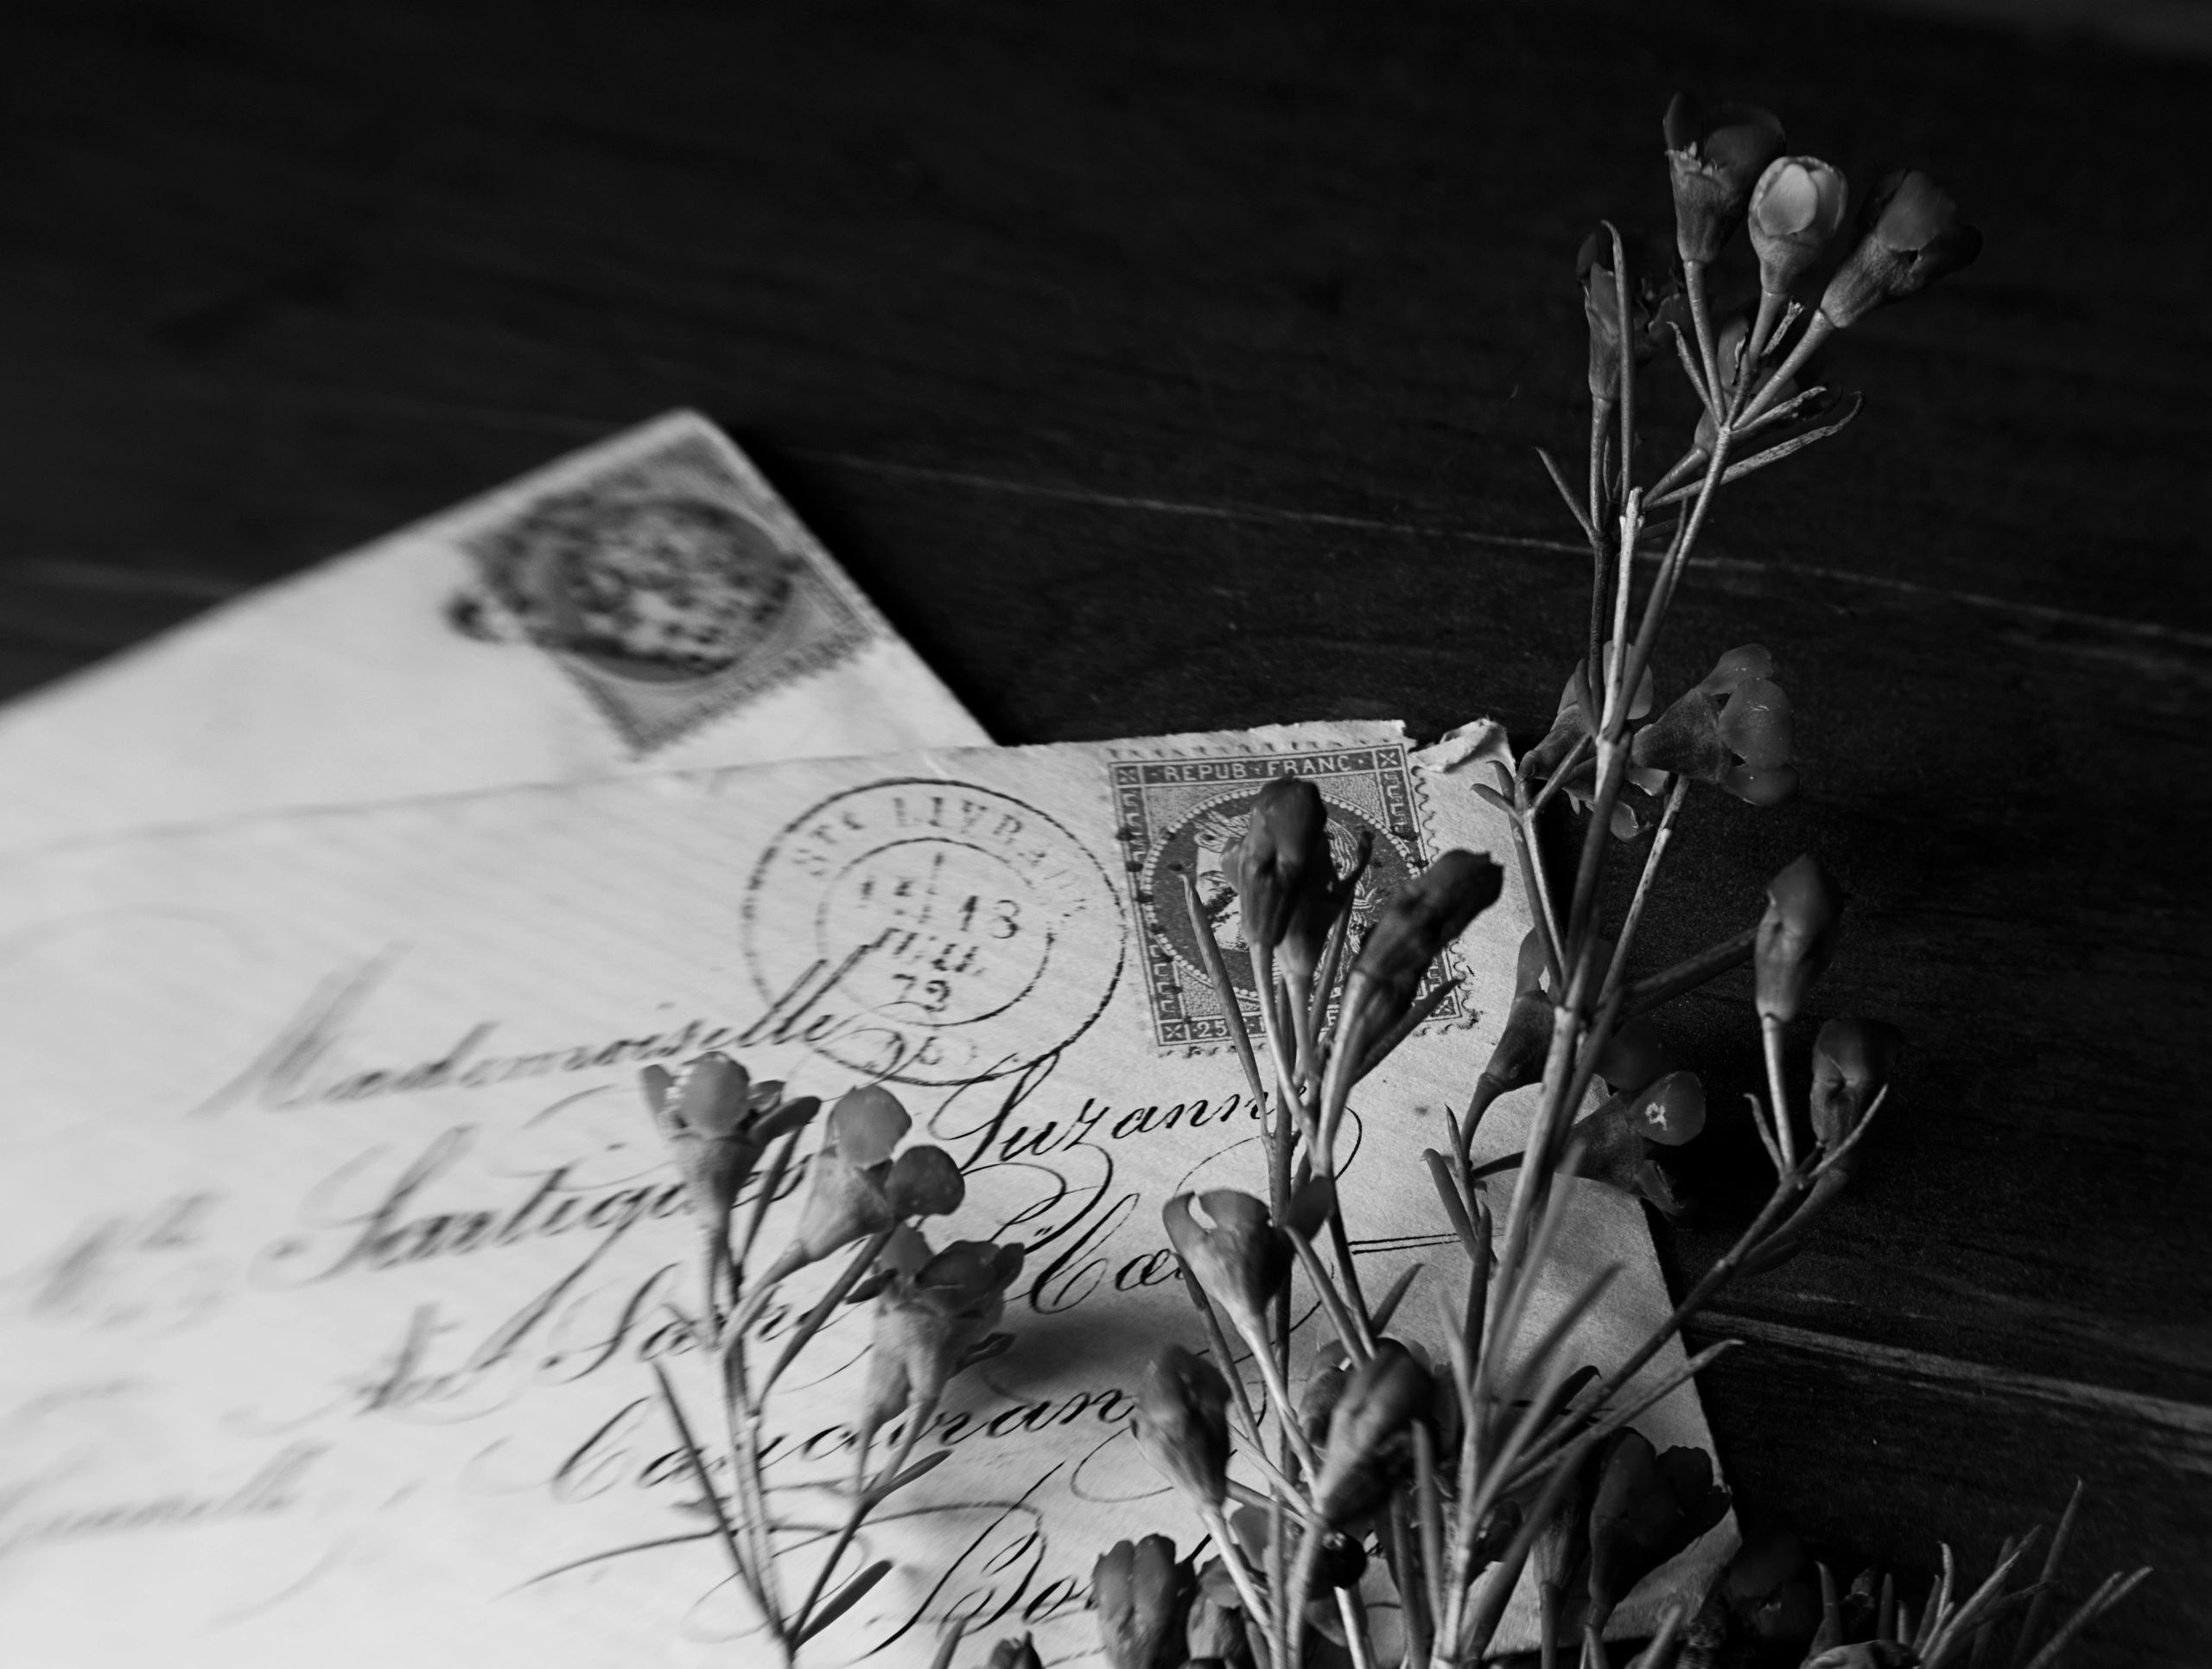 Handwritten letters with small flowers